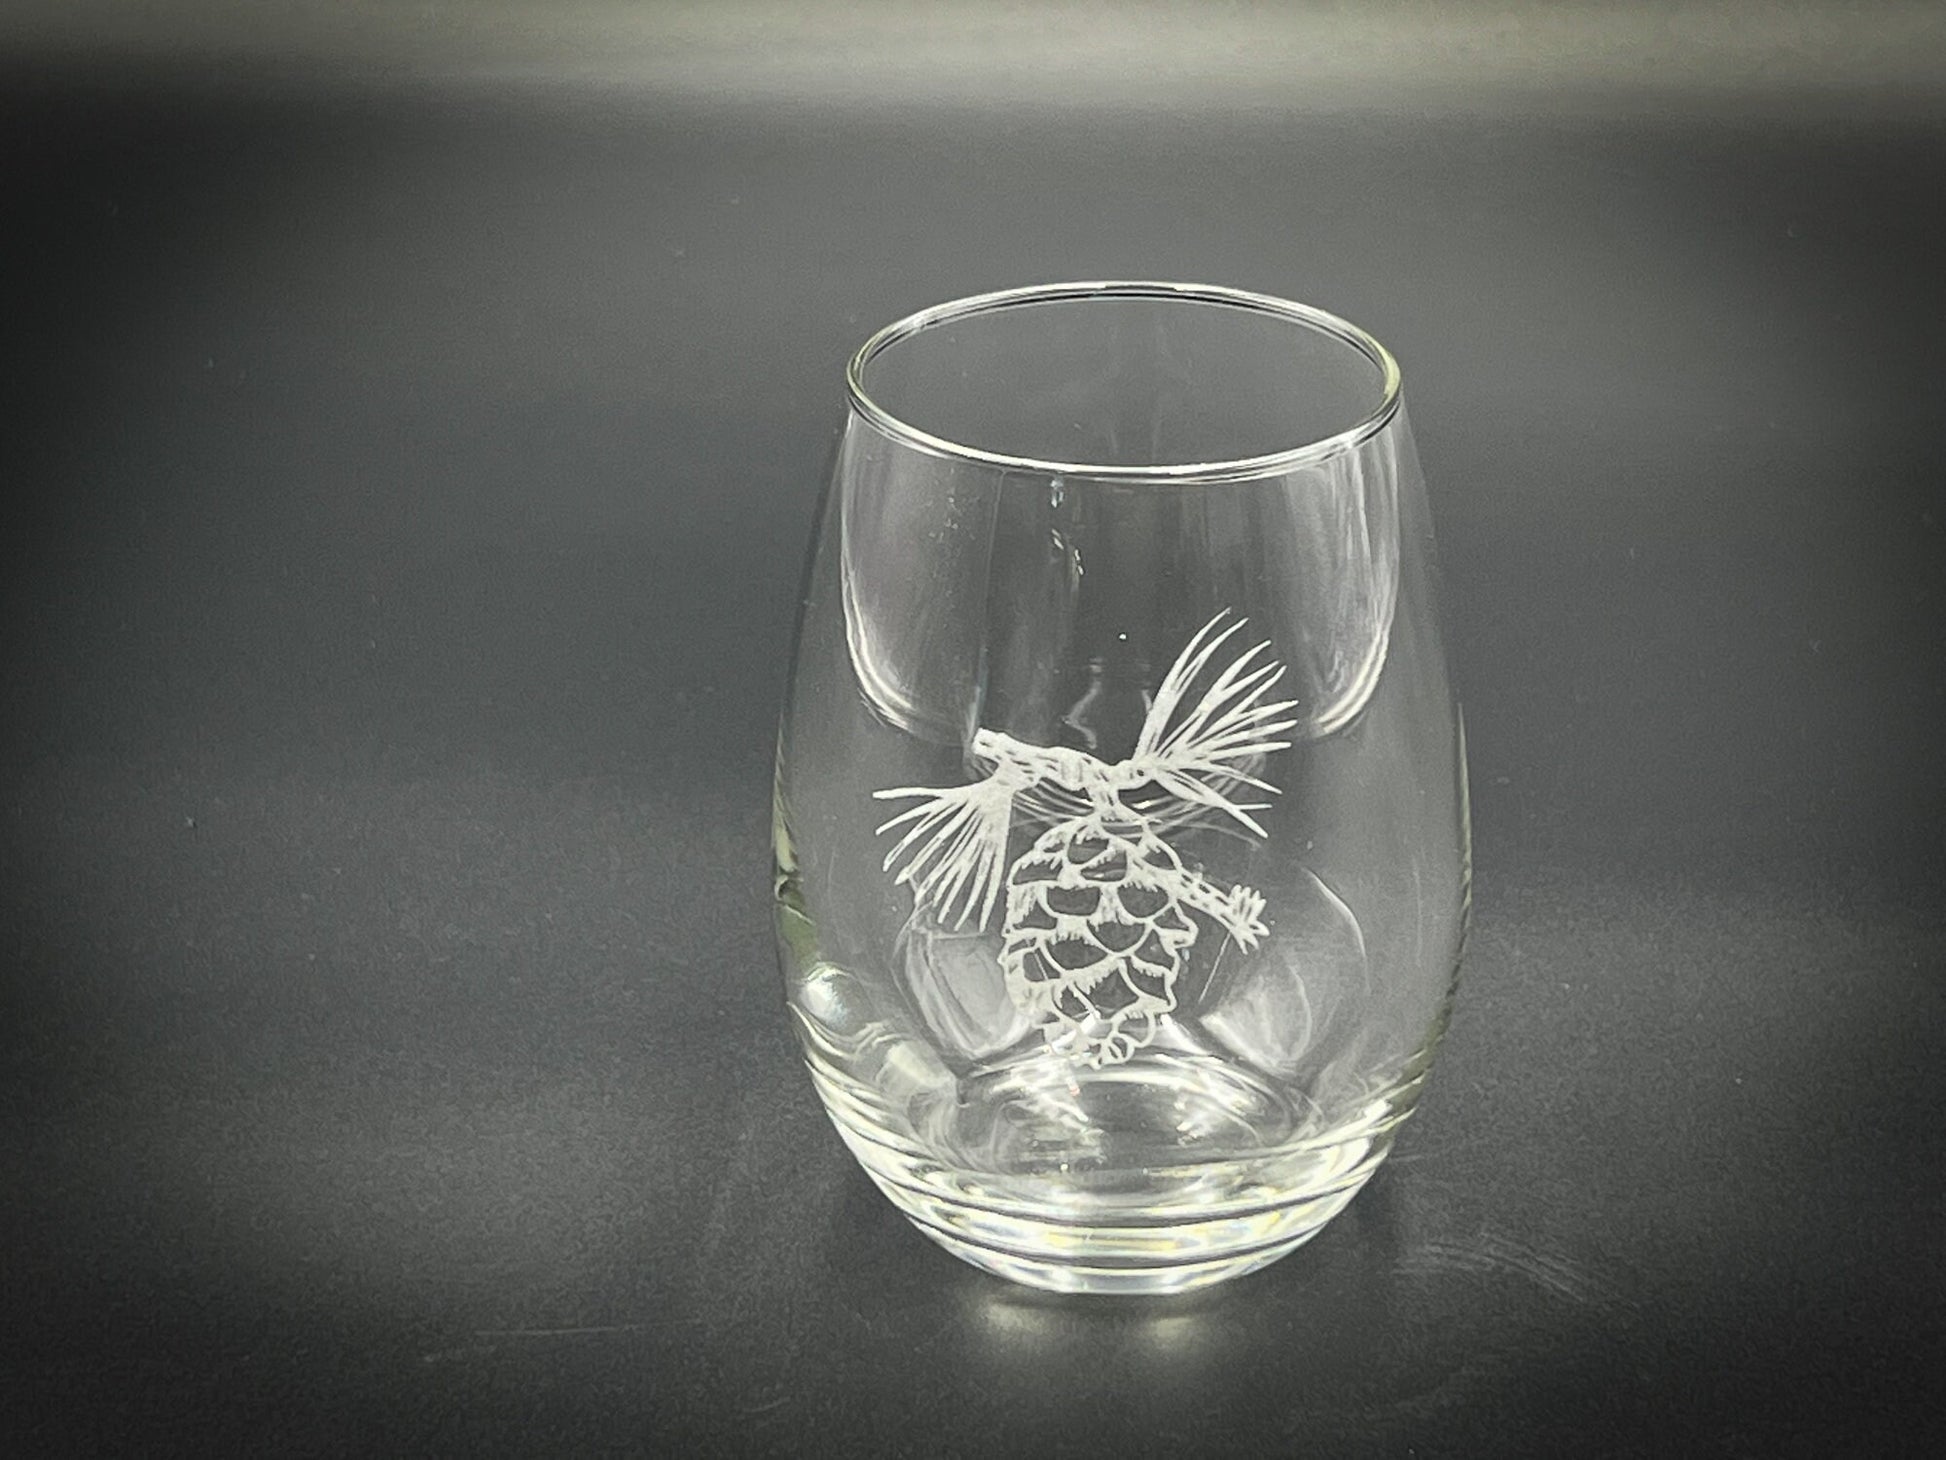 Pinecone - Etched 15 oz Stemless Wine Glass